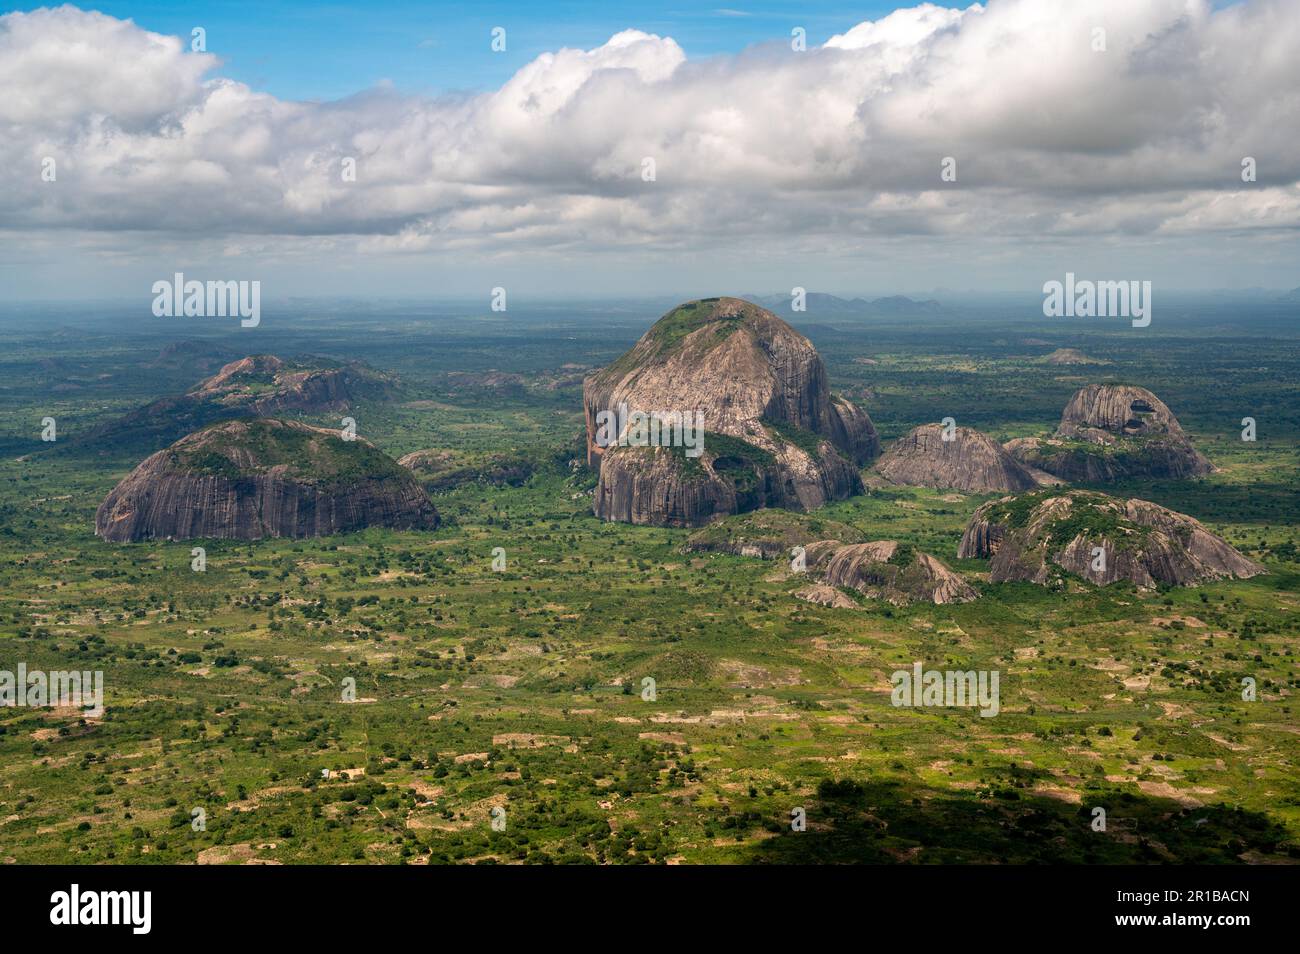 View of landscape surrounding Nampula, Mozambique. Aerial view. Stock Photo